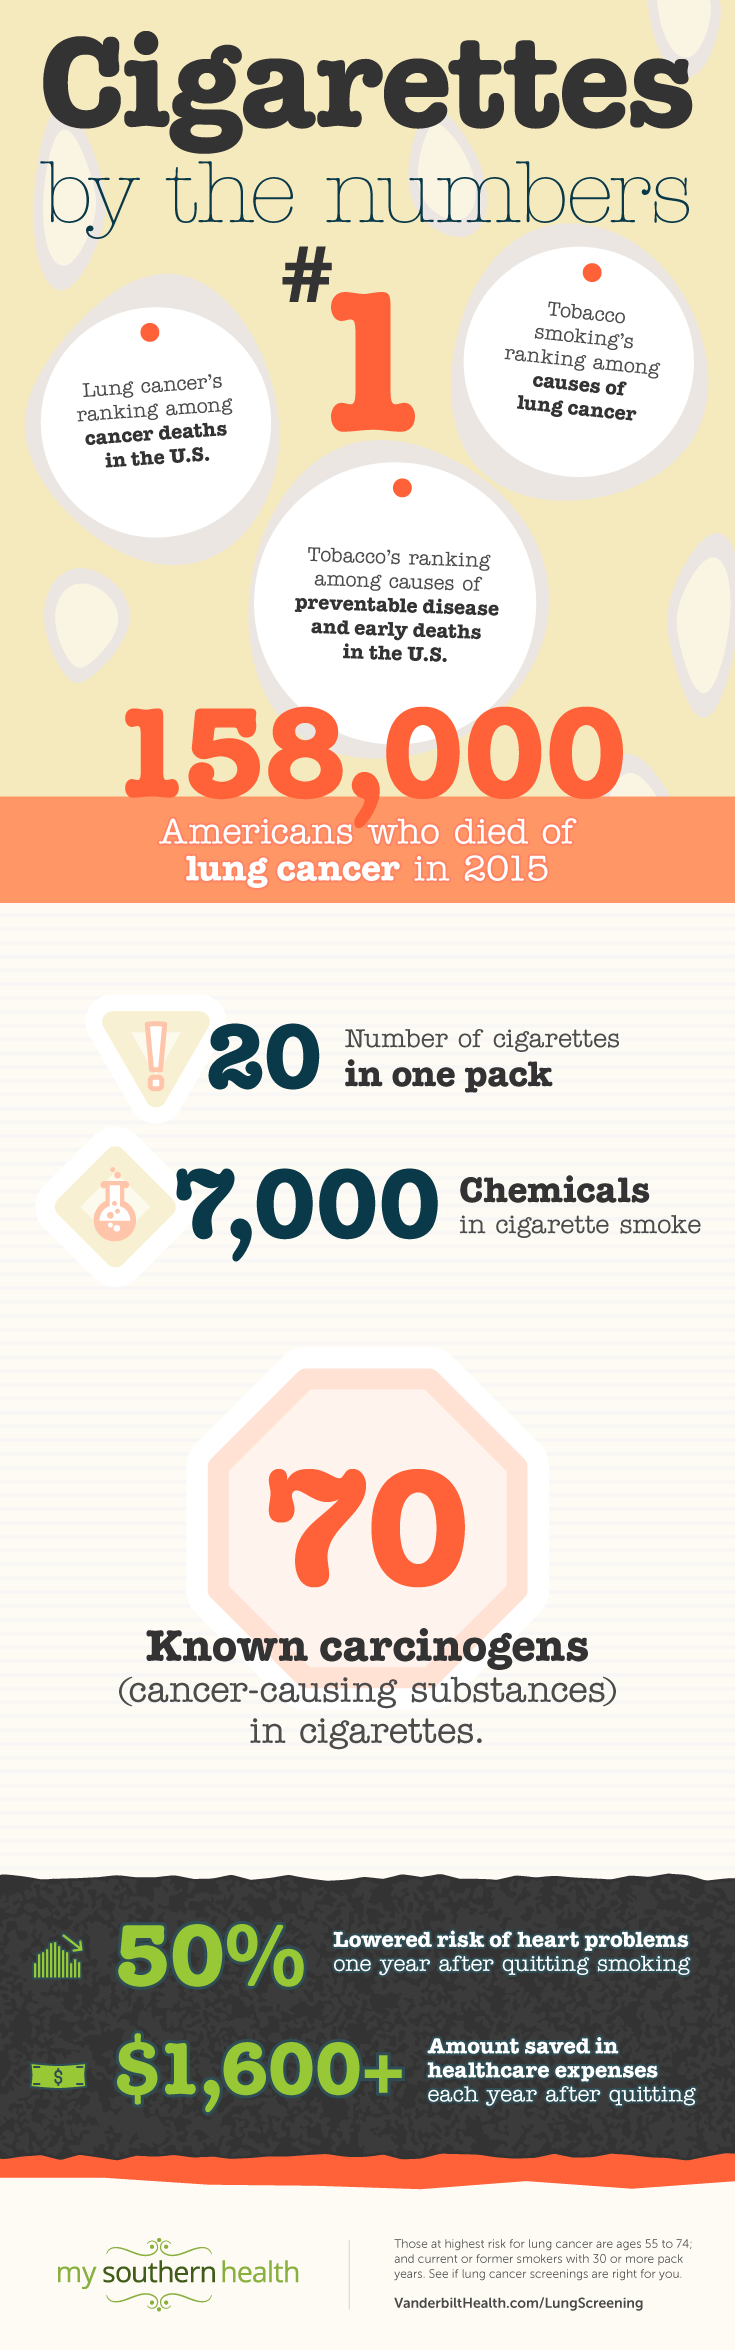 900-2897-MSH-Cigarettes-Numbers-Infographic-MK-FINAL